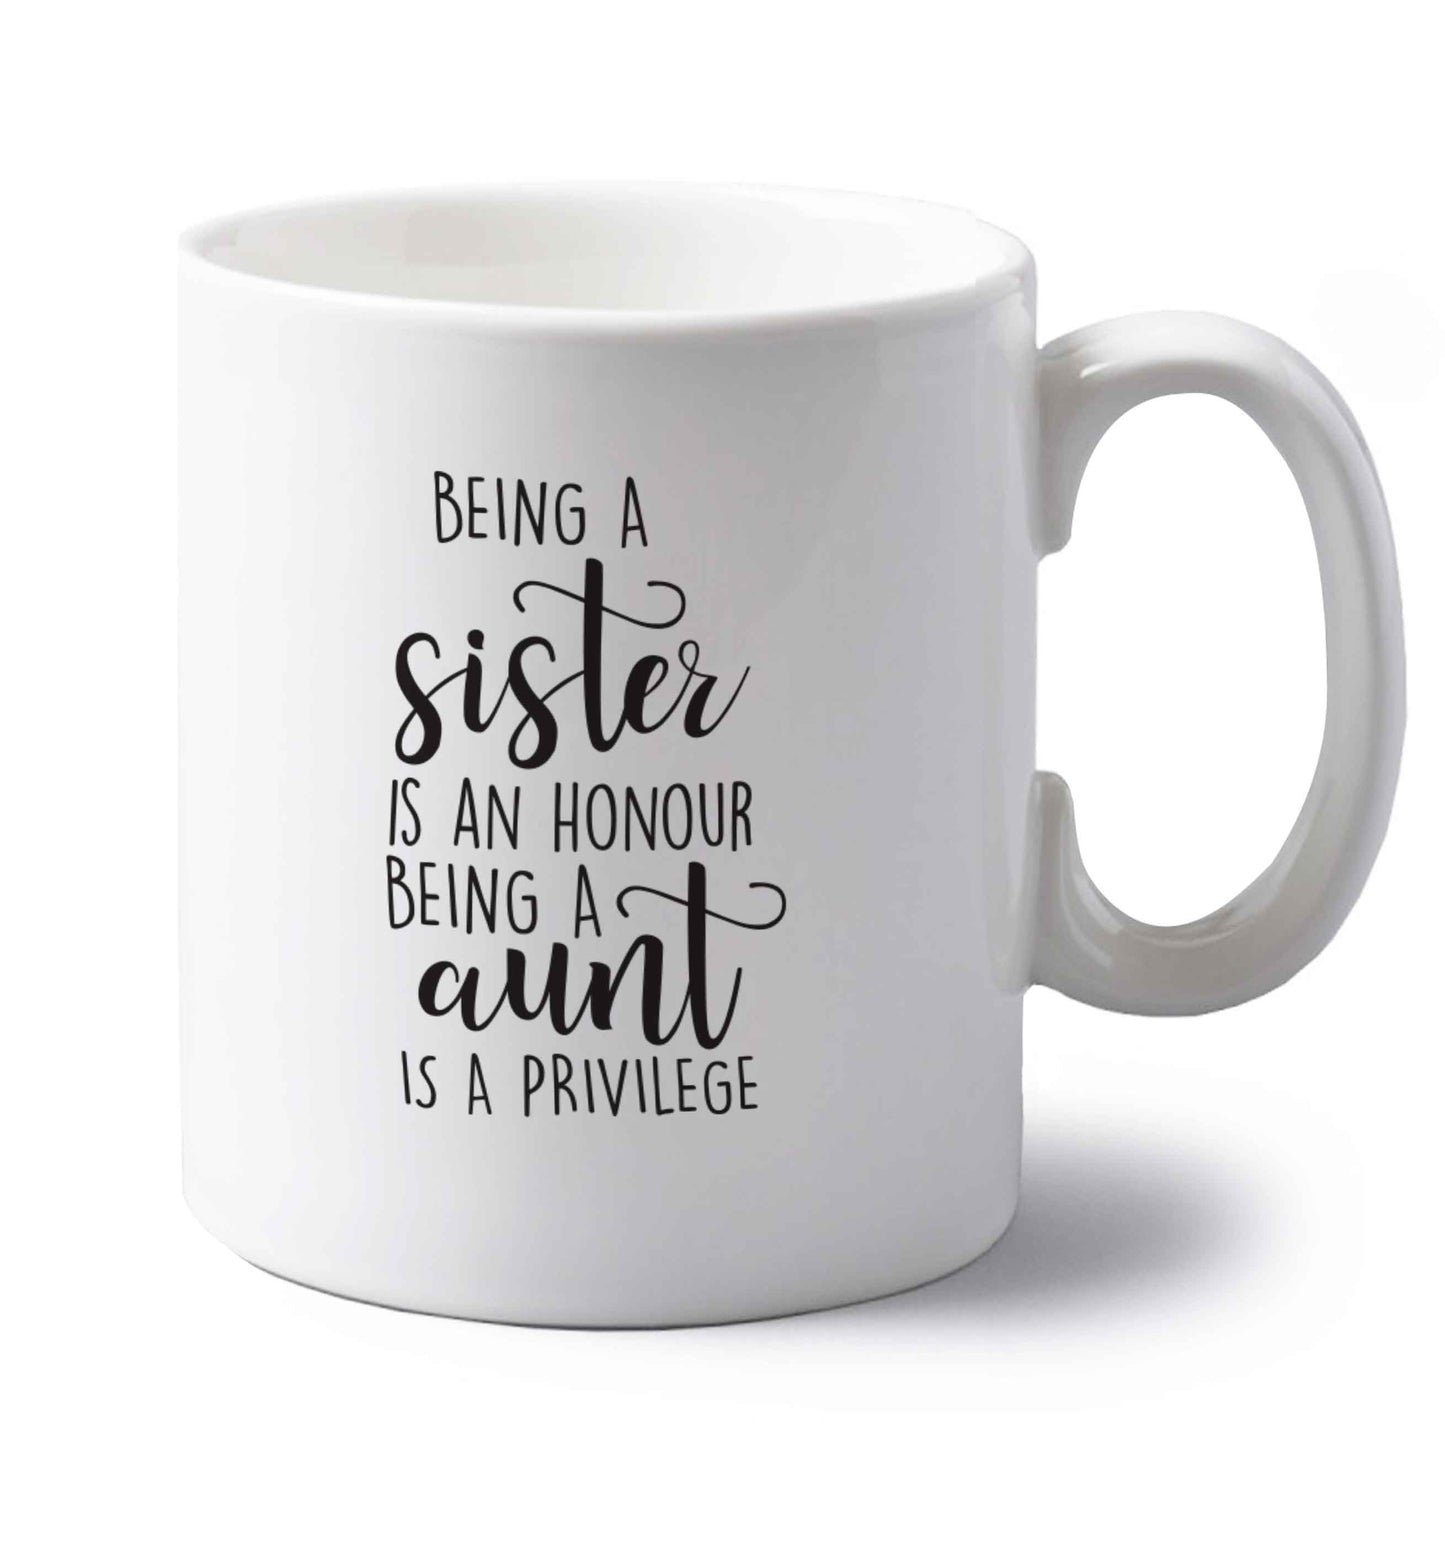 Being a sister is an honour being an auntie is a privilege left handed white ceramic mug 